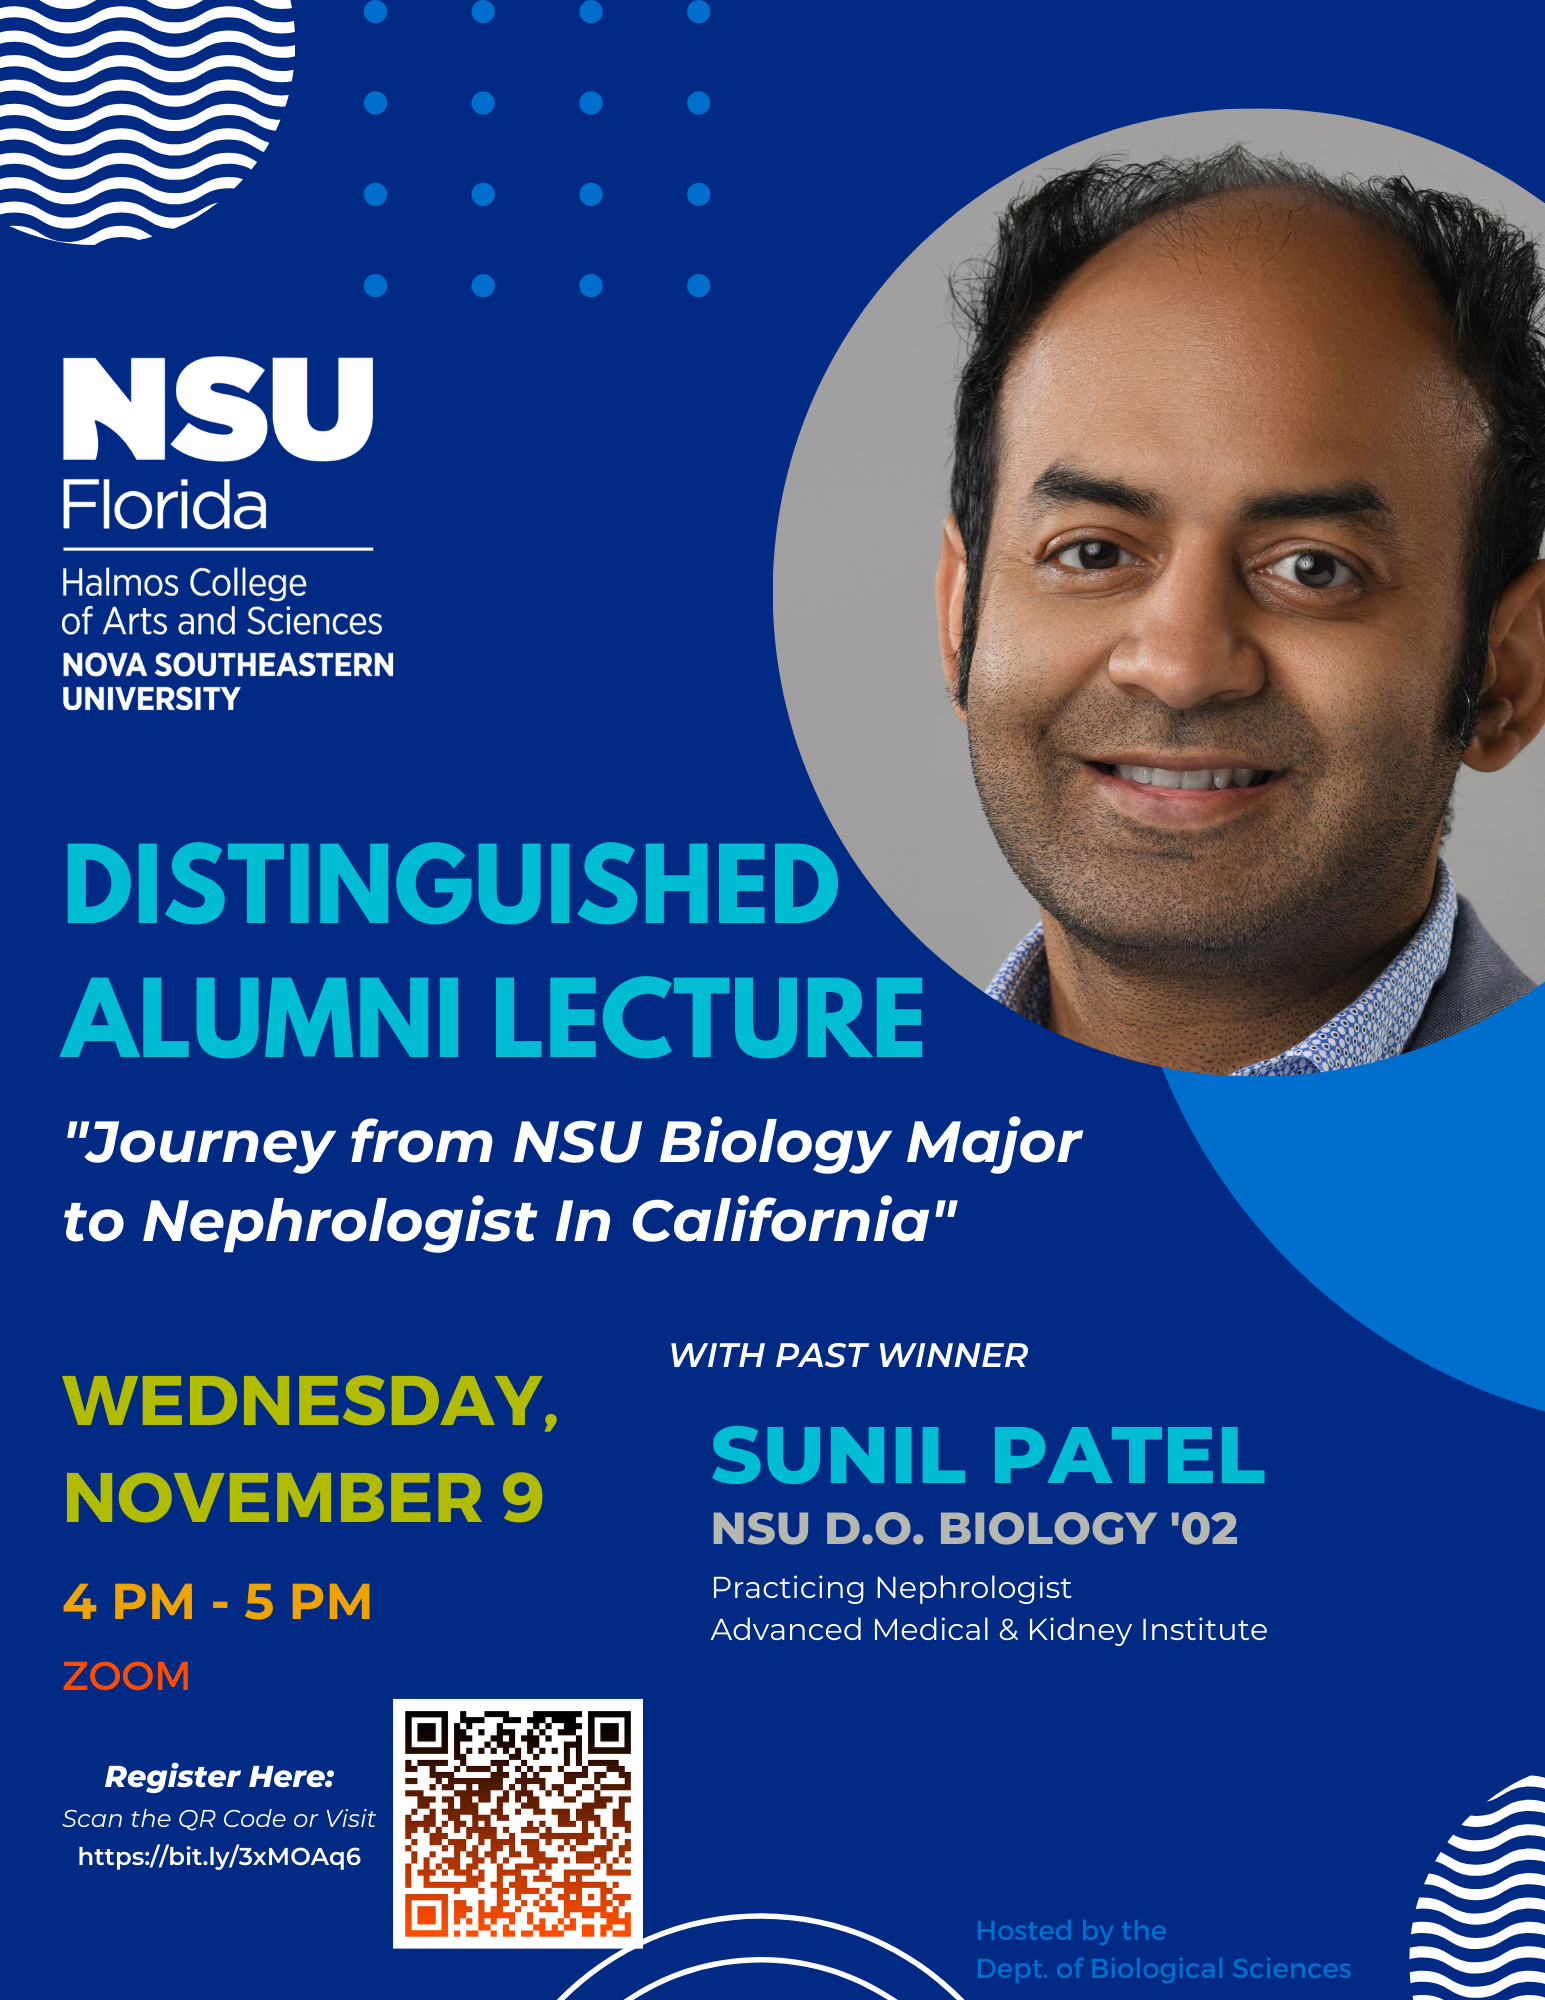 2022 Alumni Lecture - Sunil Patel 's journey from biology major to nephrologist in California